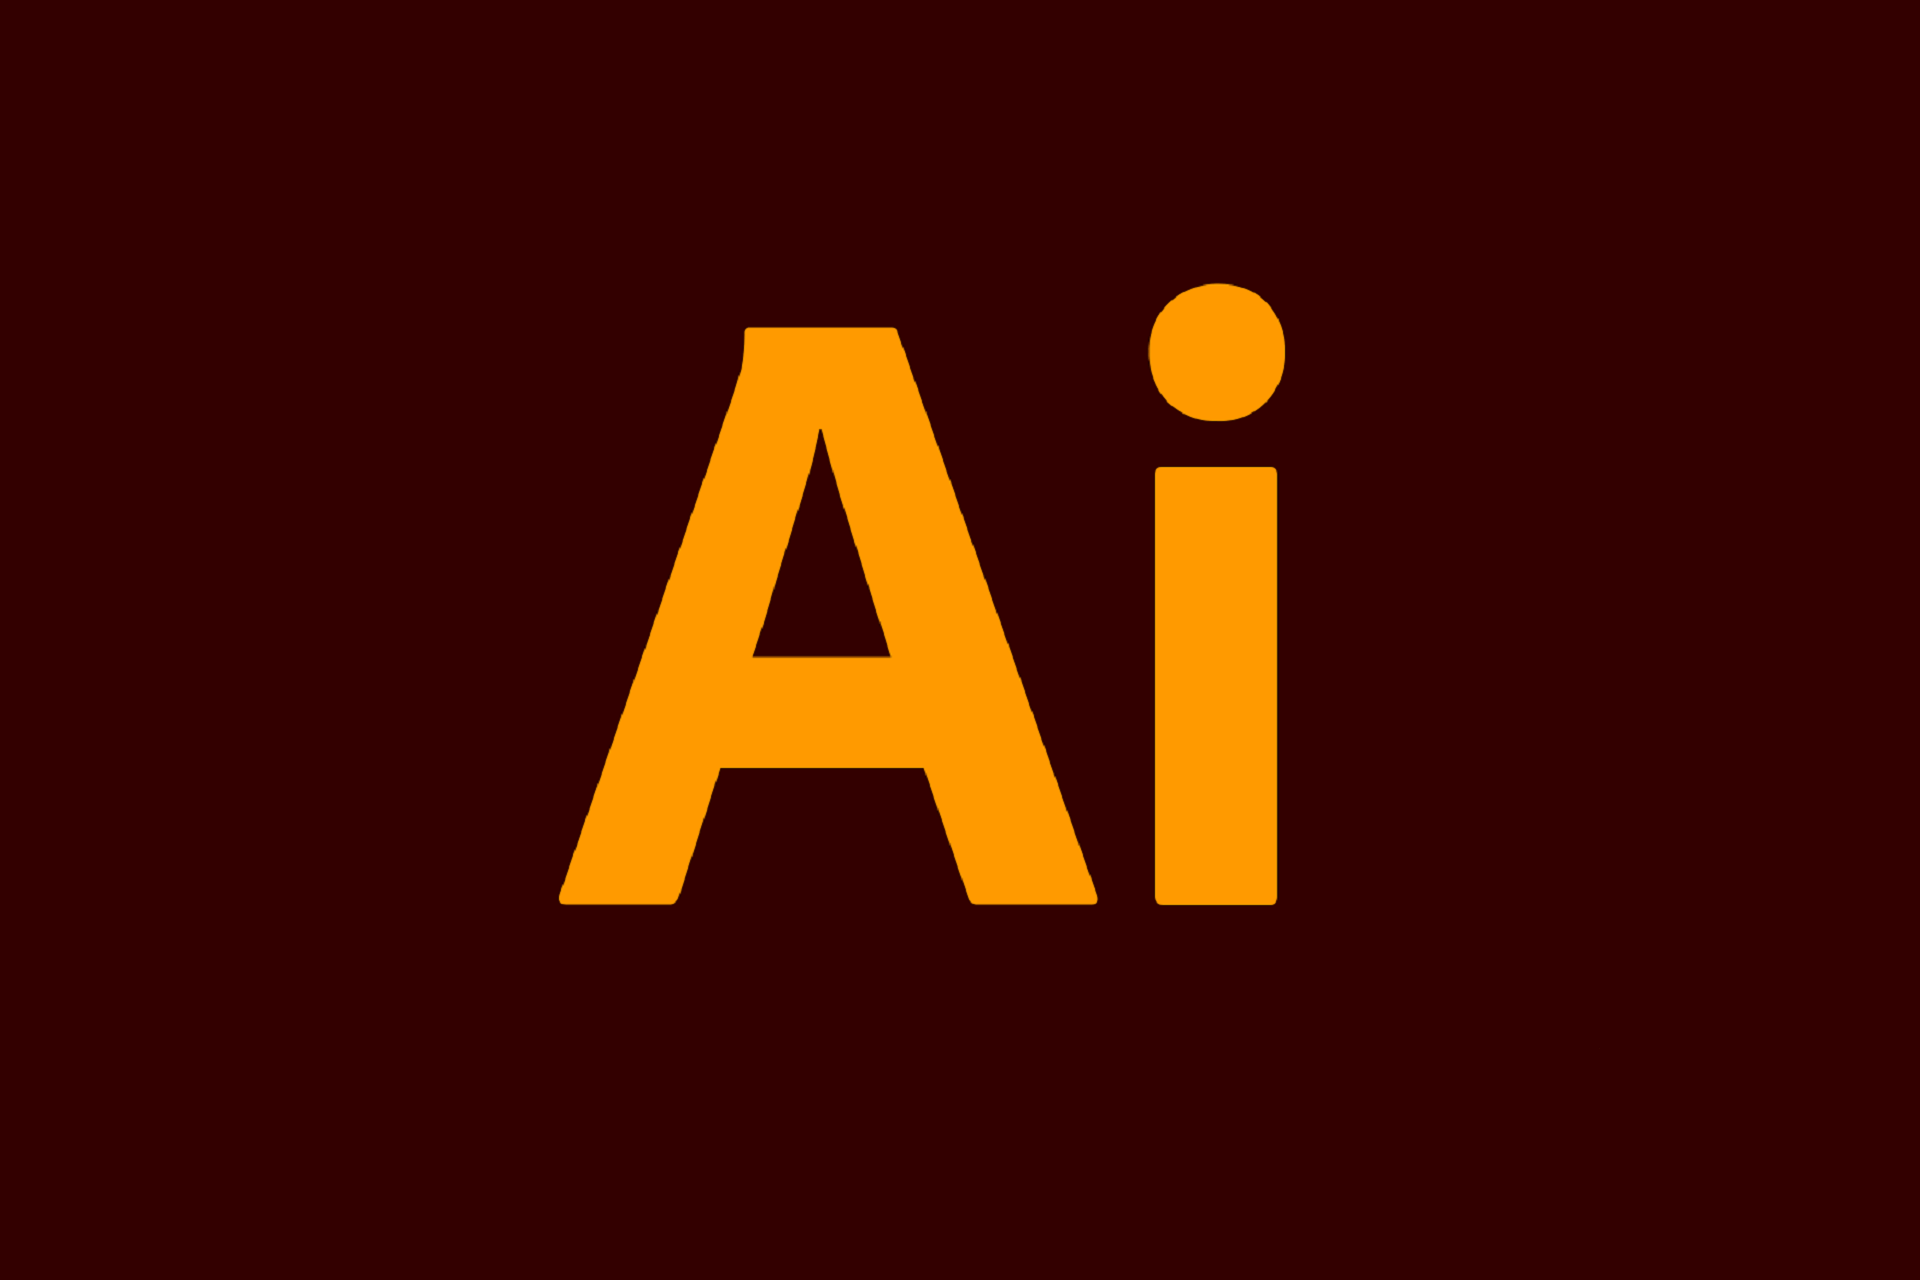 What kind of files can Adobe Illustrator open?